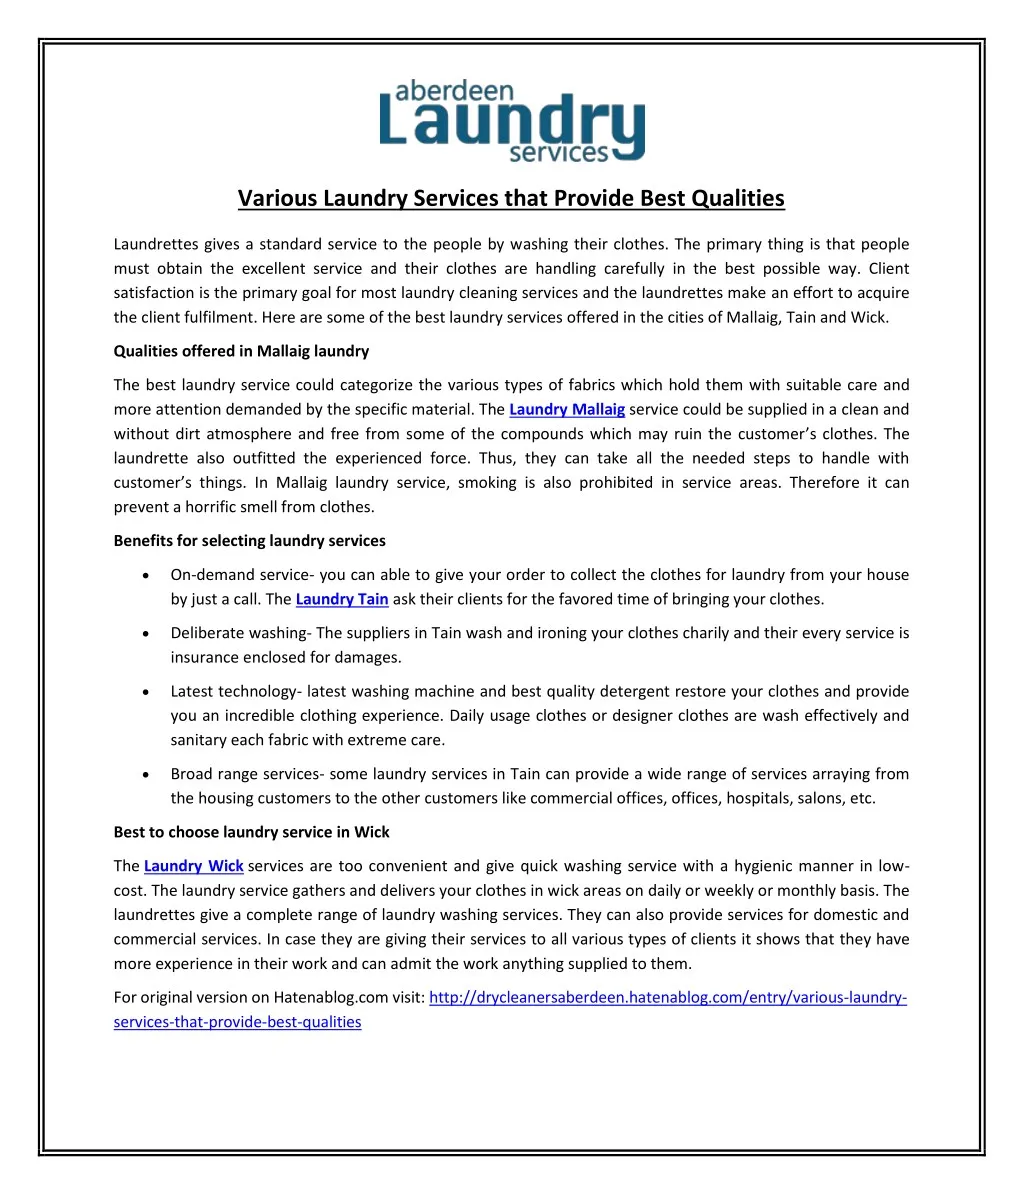 various laundry services that provide best